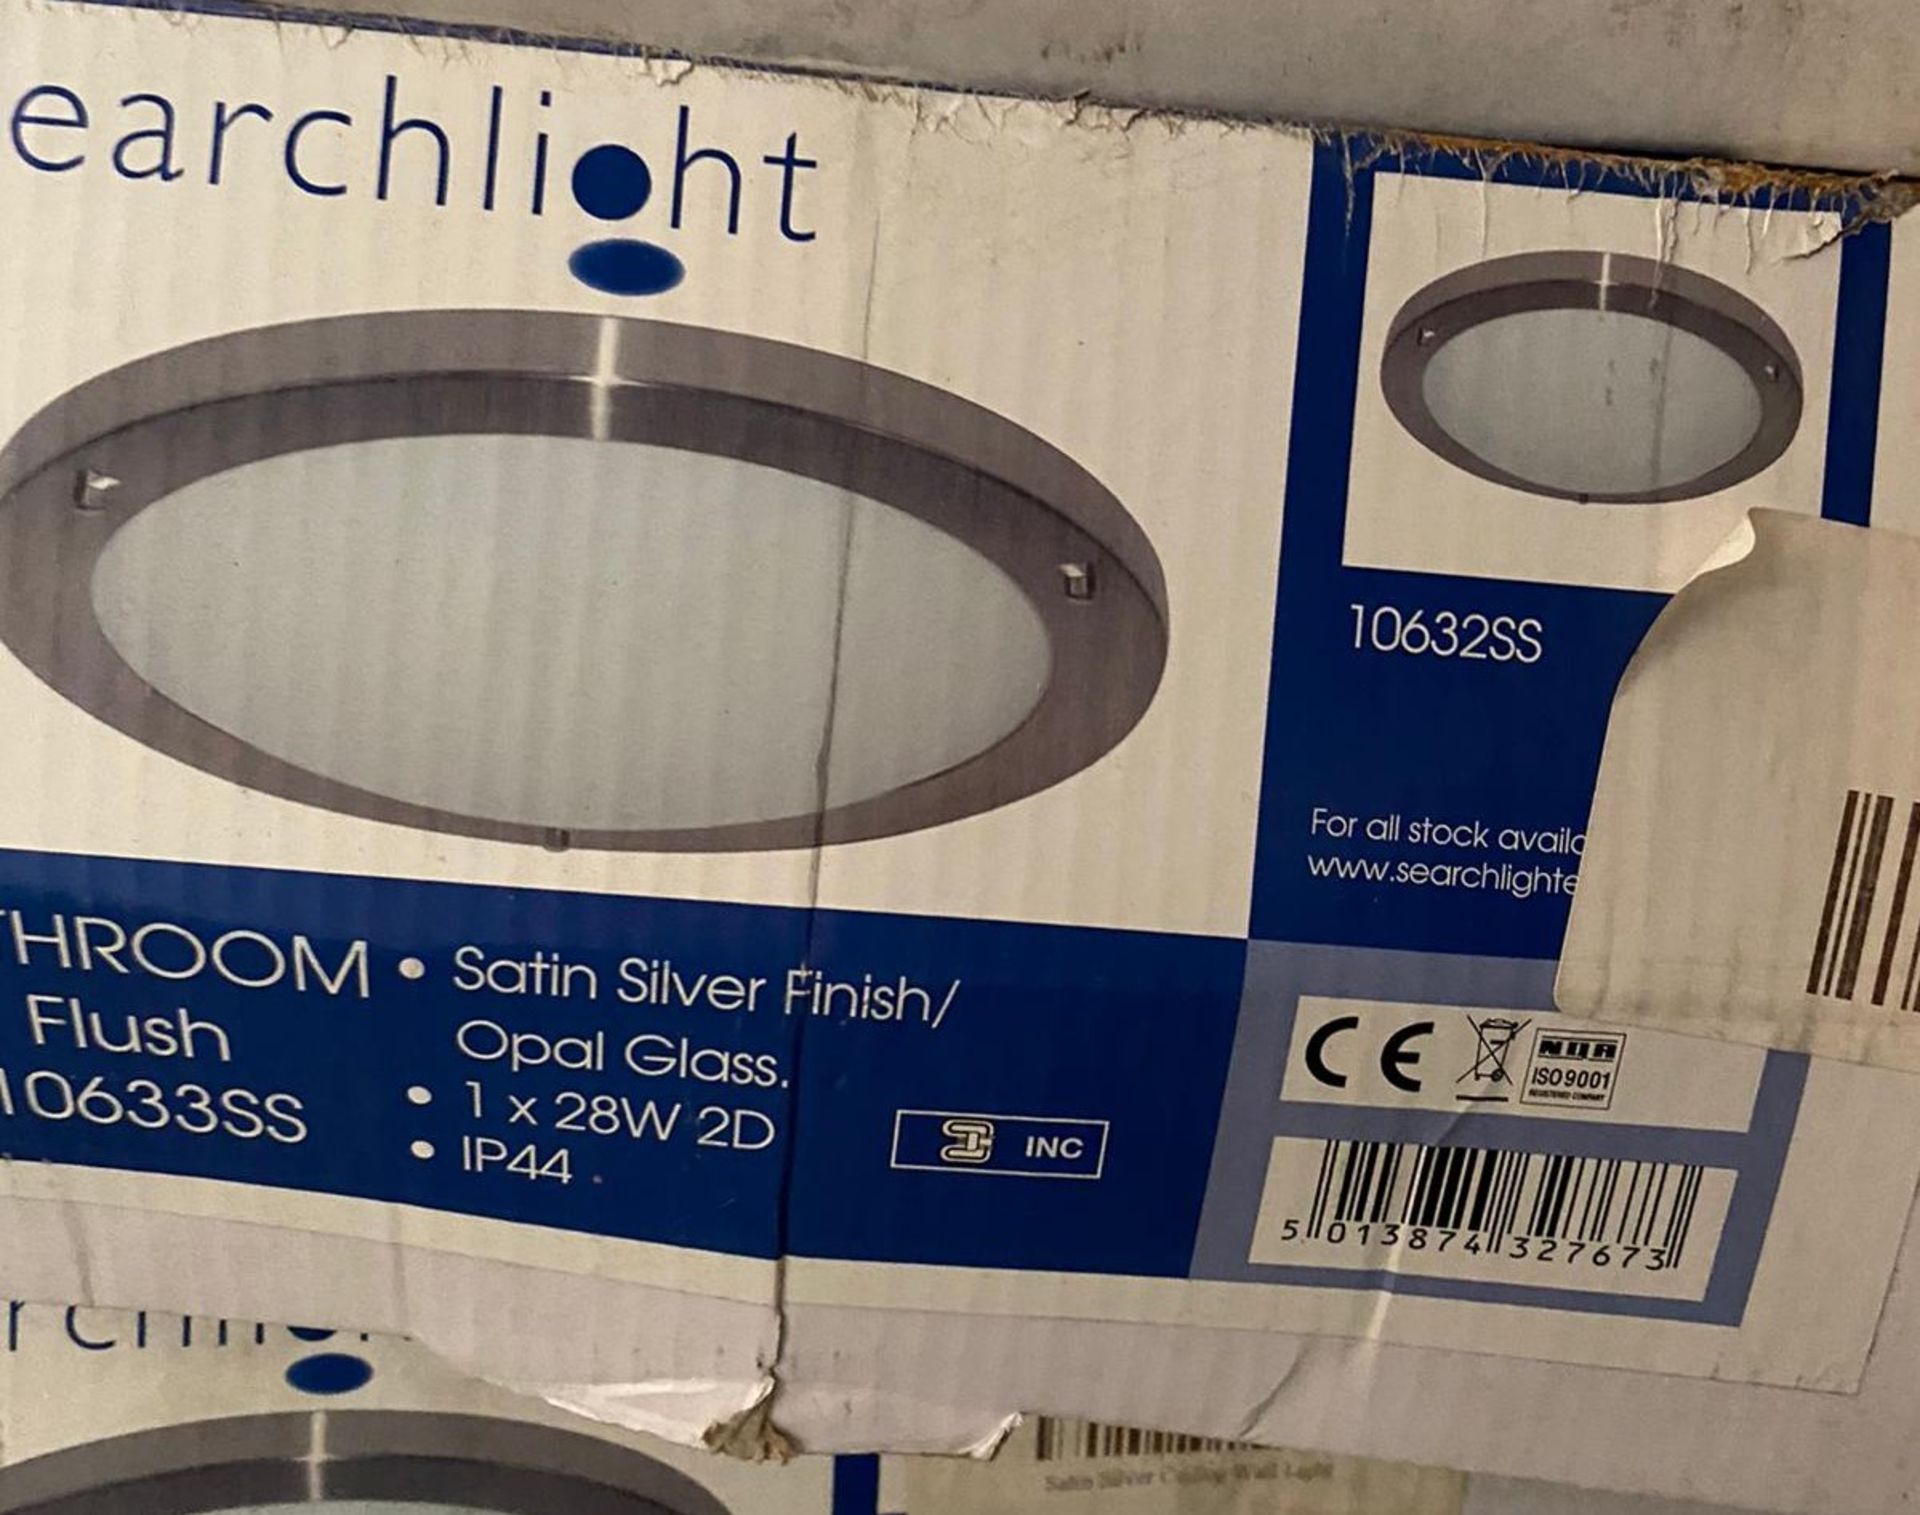 1 x Searchlight Bathroom Flush in a satin silver finish - Ref: 10632SS - New and Boxed - RRP: £60.00